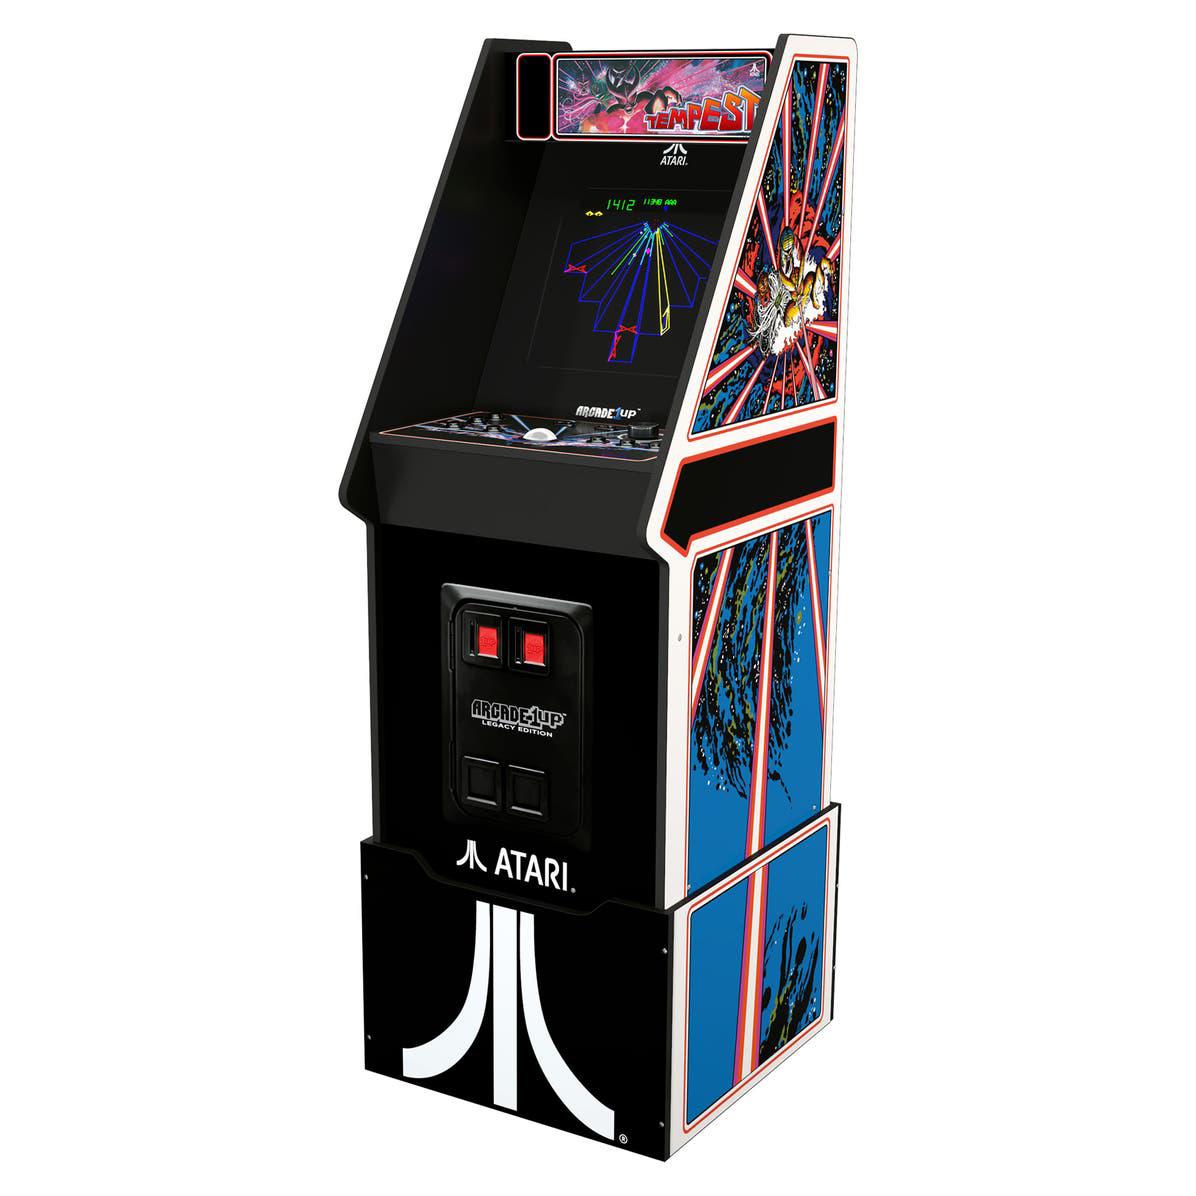 Arcade1Up Atari Tempest Legacy Edition Full Size Arcade Cabinet for $269.99 Shipped